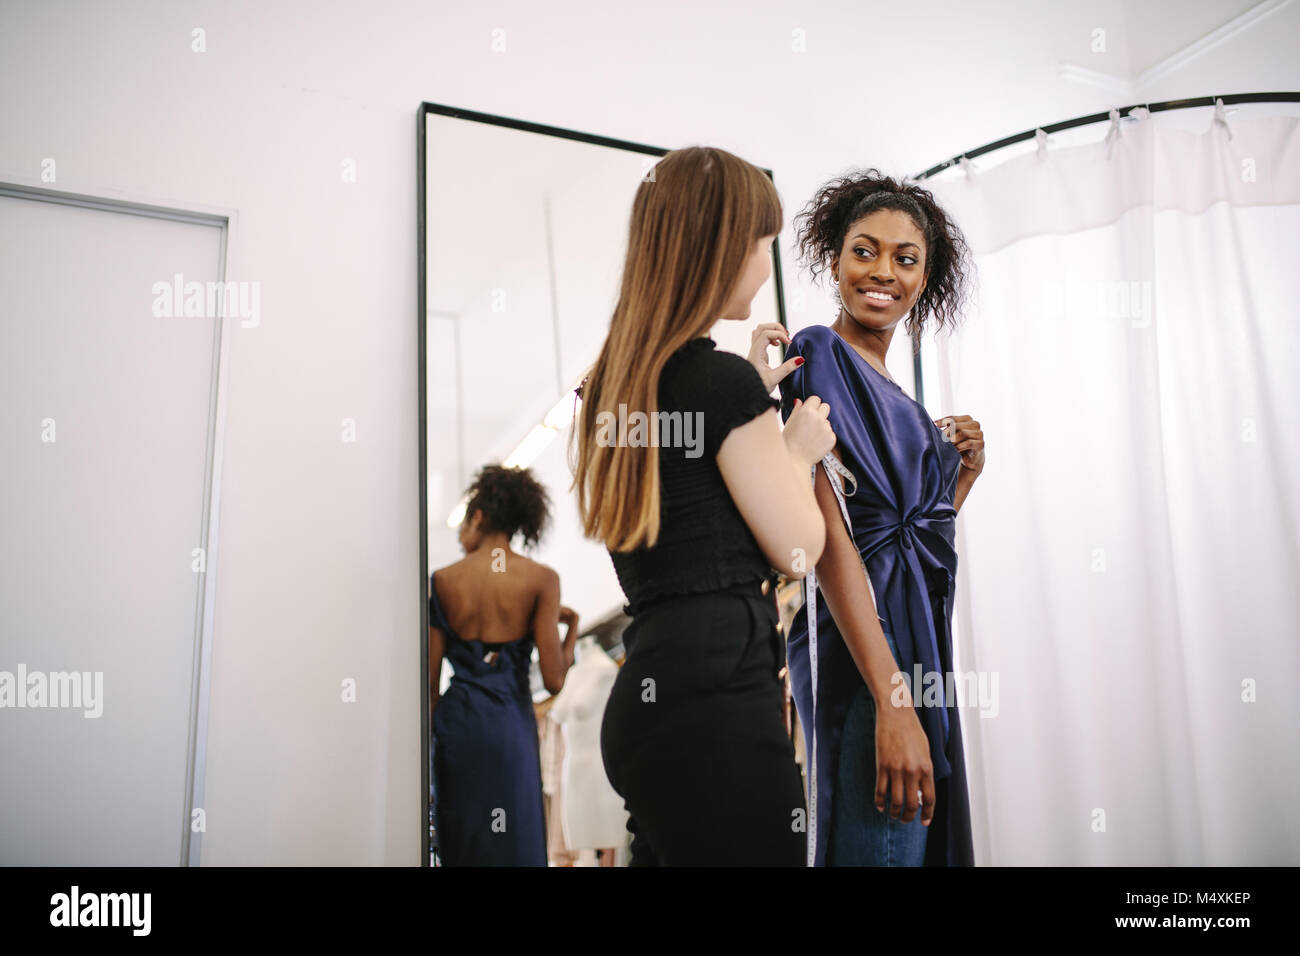 Fashion designer trying new designer clothes on a model. Woman entrepreneur in her cloth shop designing new clothes. Stock Photo